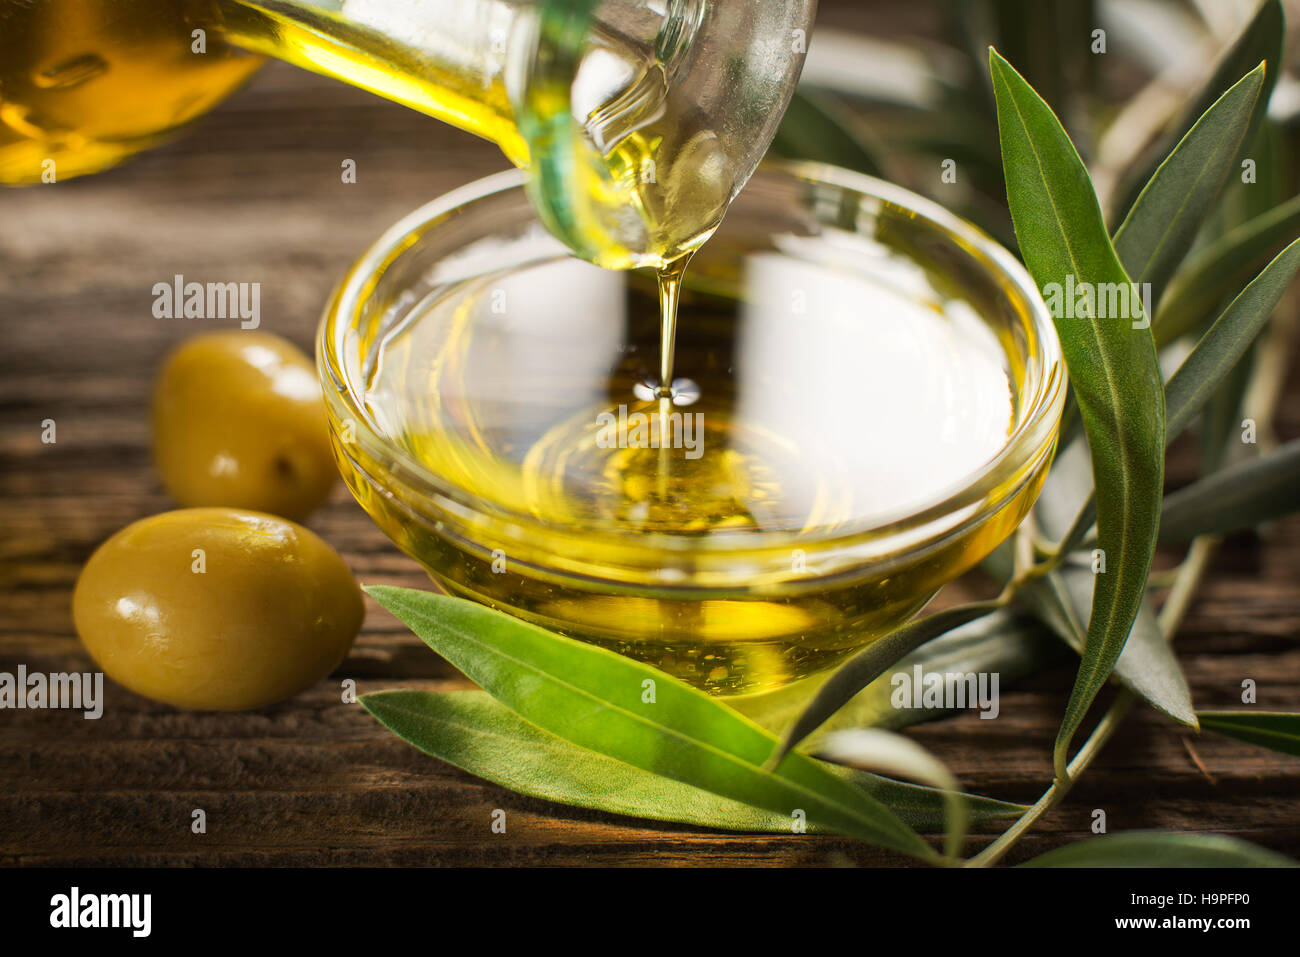 Bottle pouring virgin olive oil in a bowl close up Stock Photo